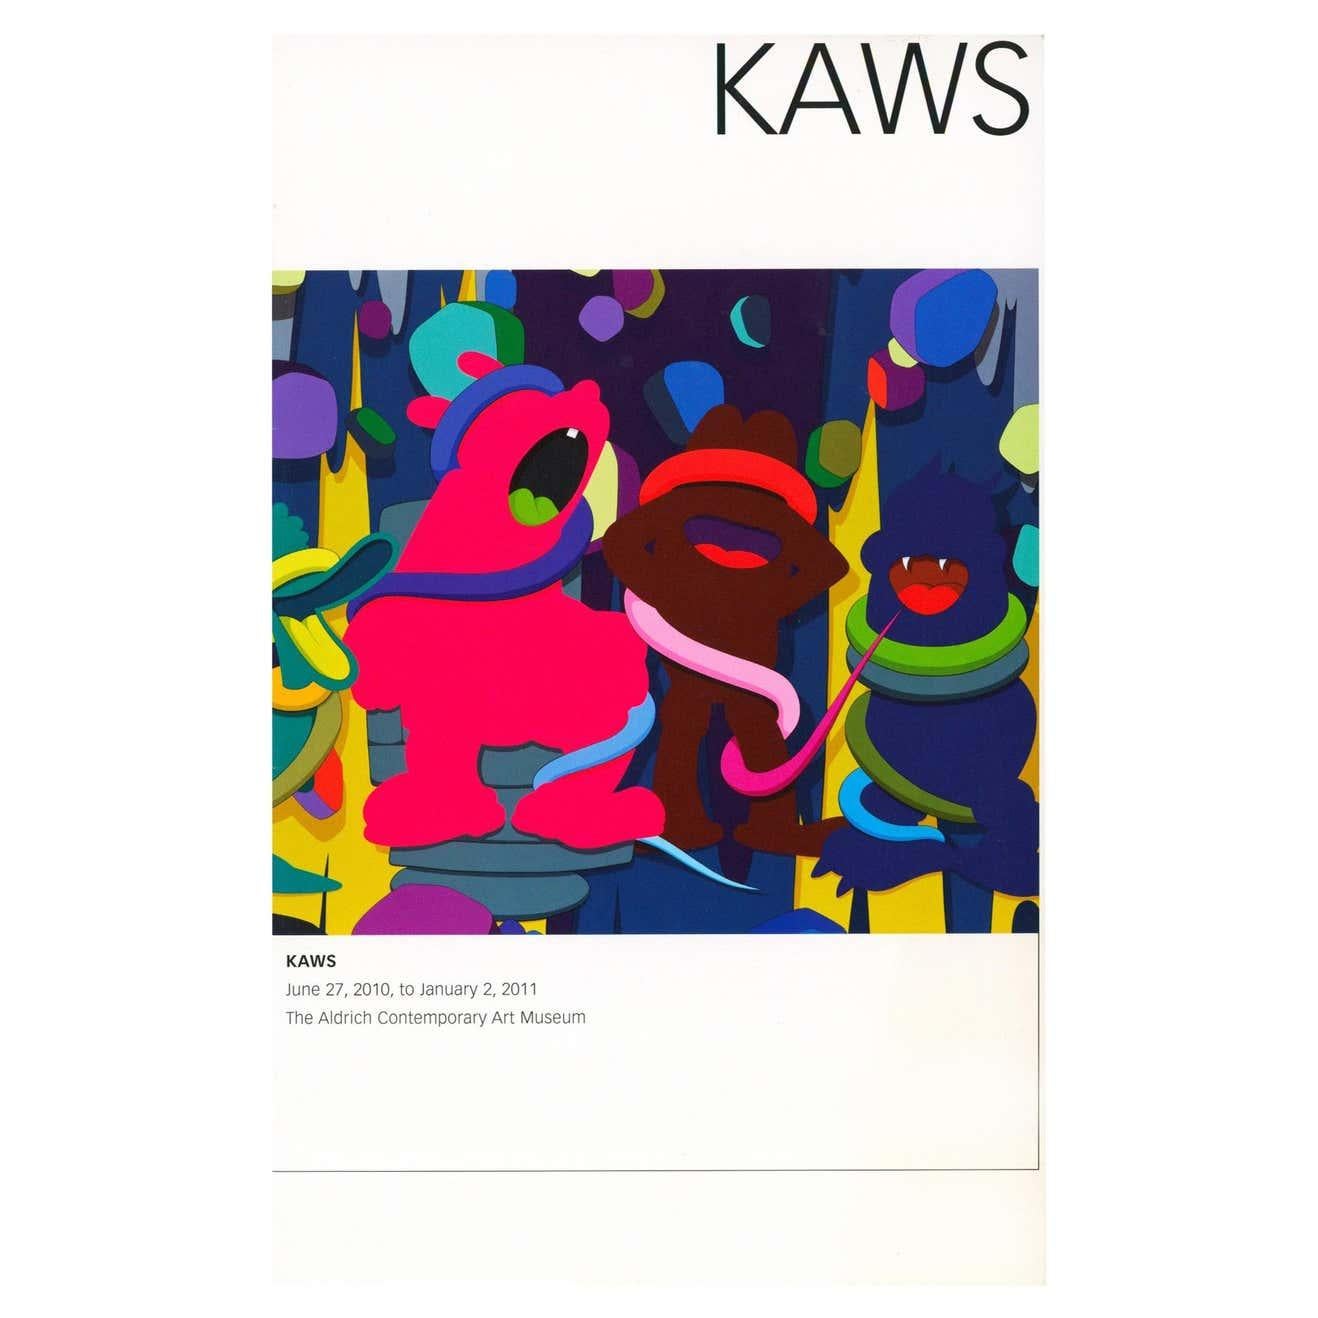 KAWS The Aldrich Contemporary Art Museum (June 27, 2010 to January 2, 2011, Ridgefield, CT):

Rare original program to KAWS' first solo exhibition. 

Staple-bound museum program; approximately 10-15 pages featuring photos & text highlighting the